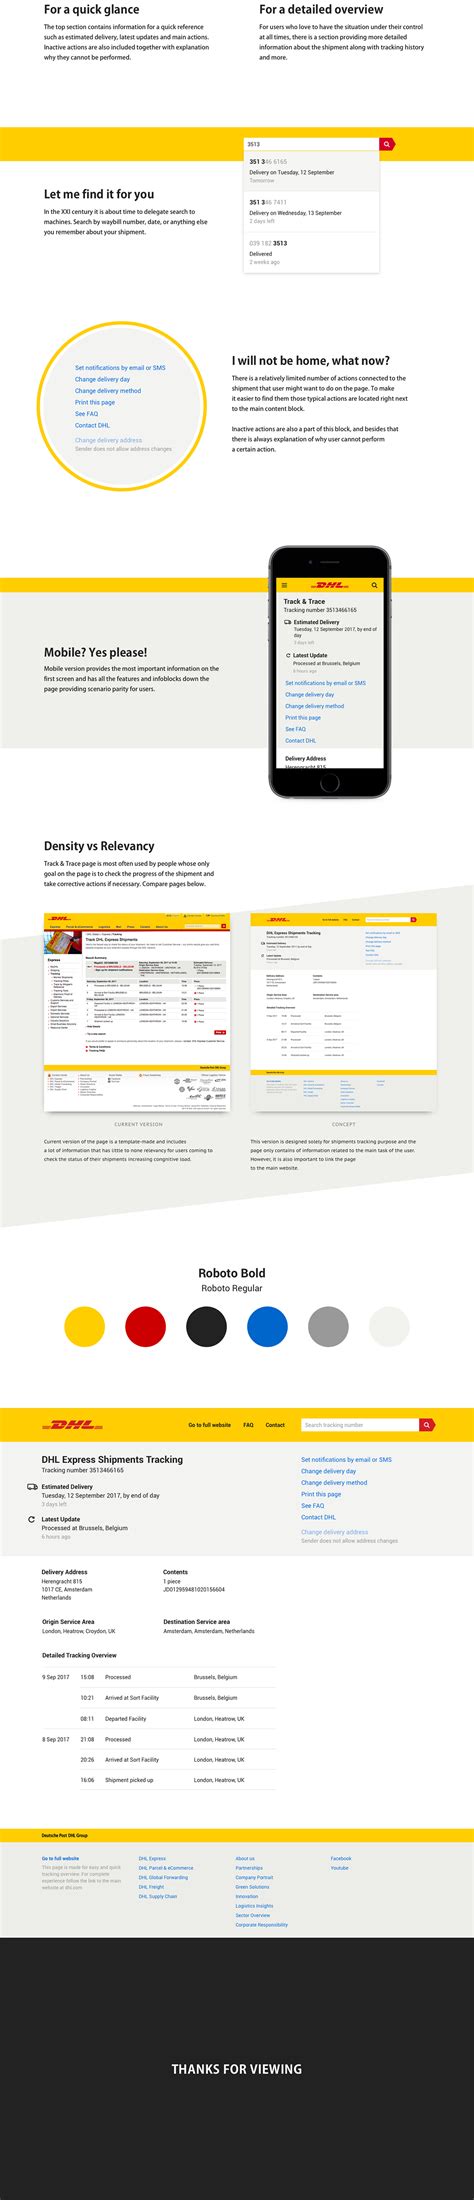 dhl track trace  behance